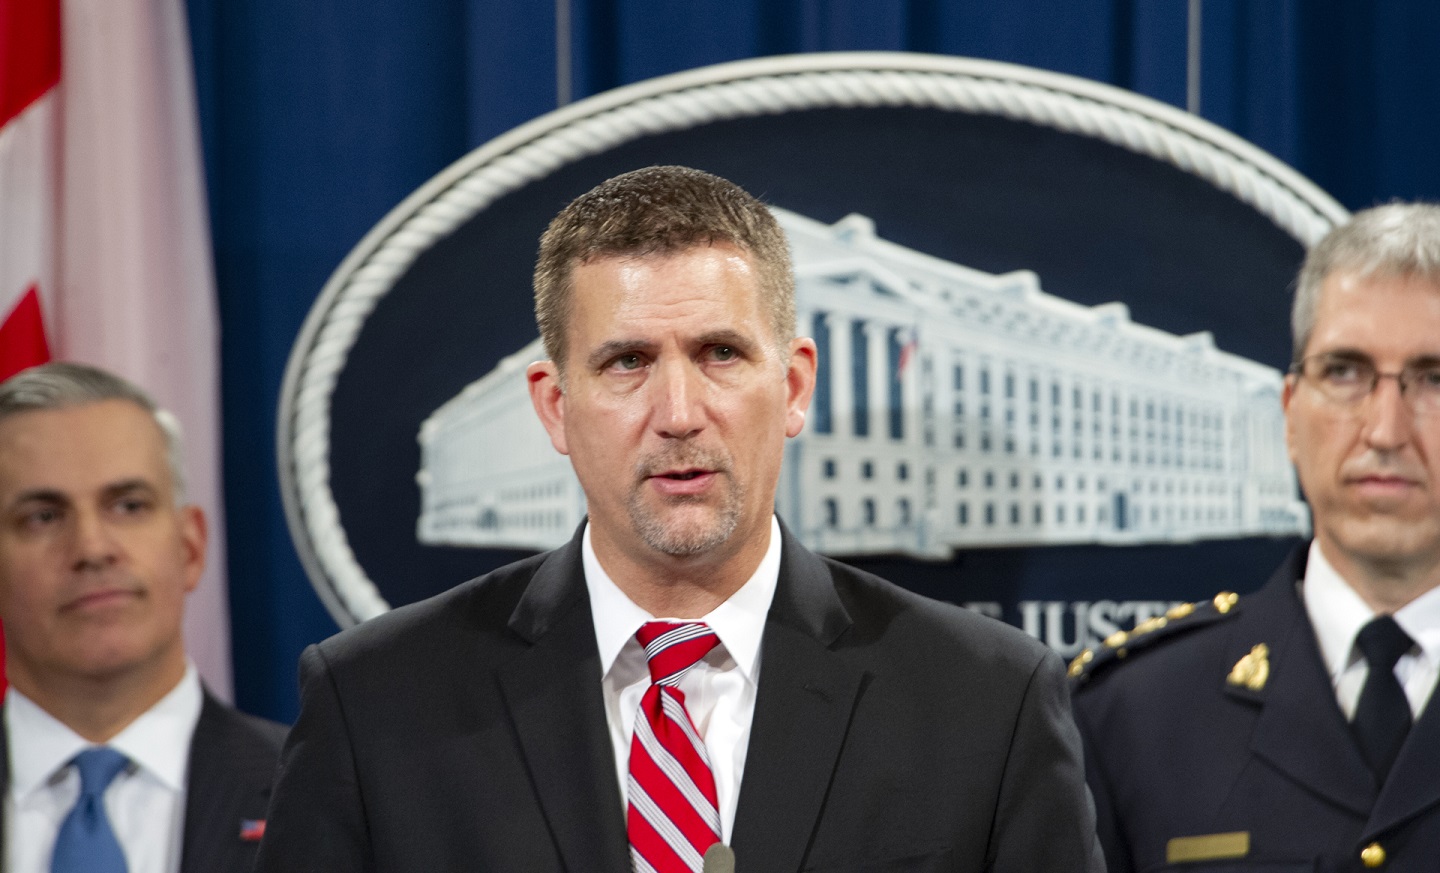 A photograph of FBI Cyber Division Deputy Assistant Director, Eric Welling, speaking at the Department of Justice in Washington, D.C.